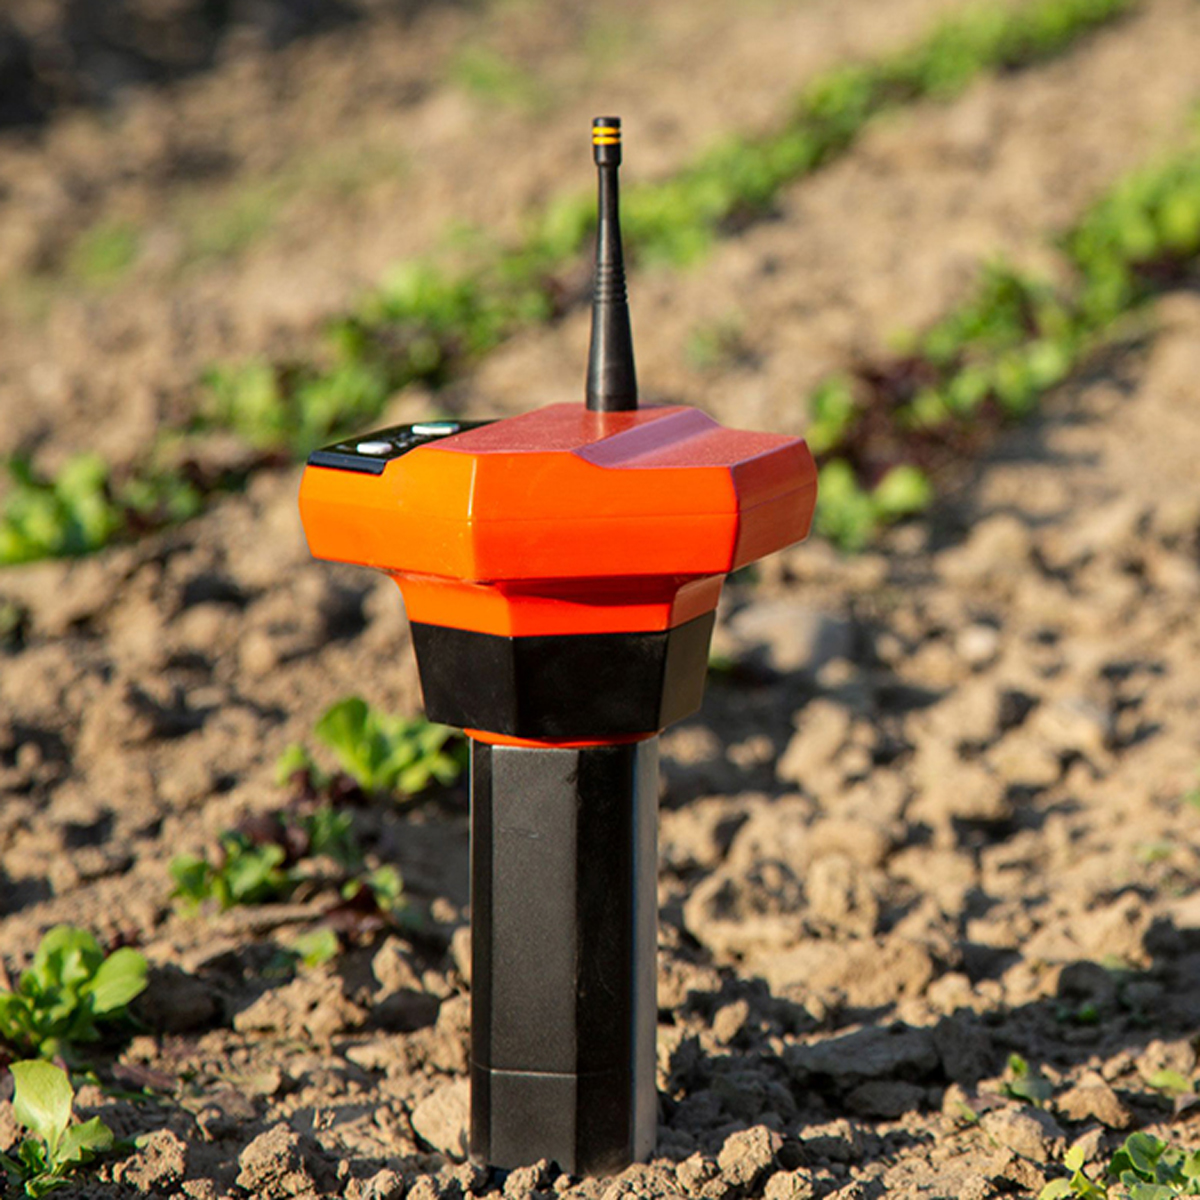 Teralytic - Bringing IoT to Big Agriculture